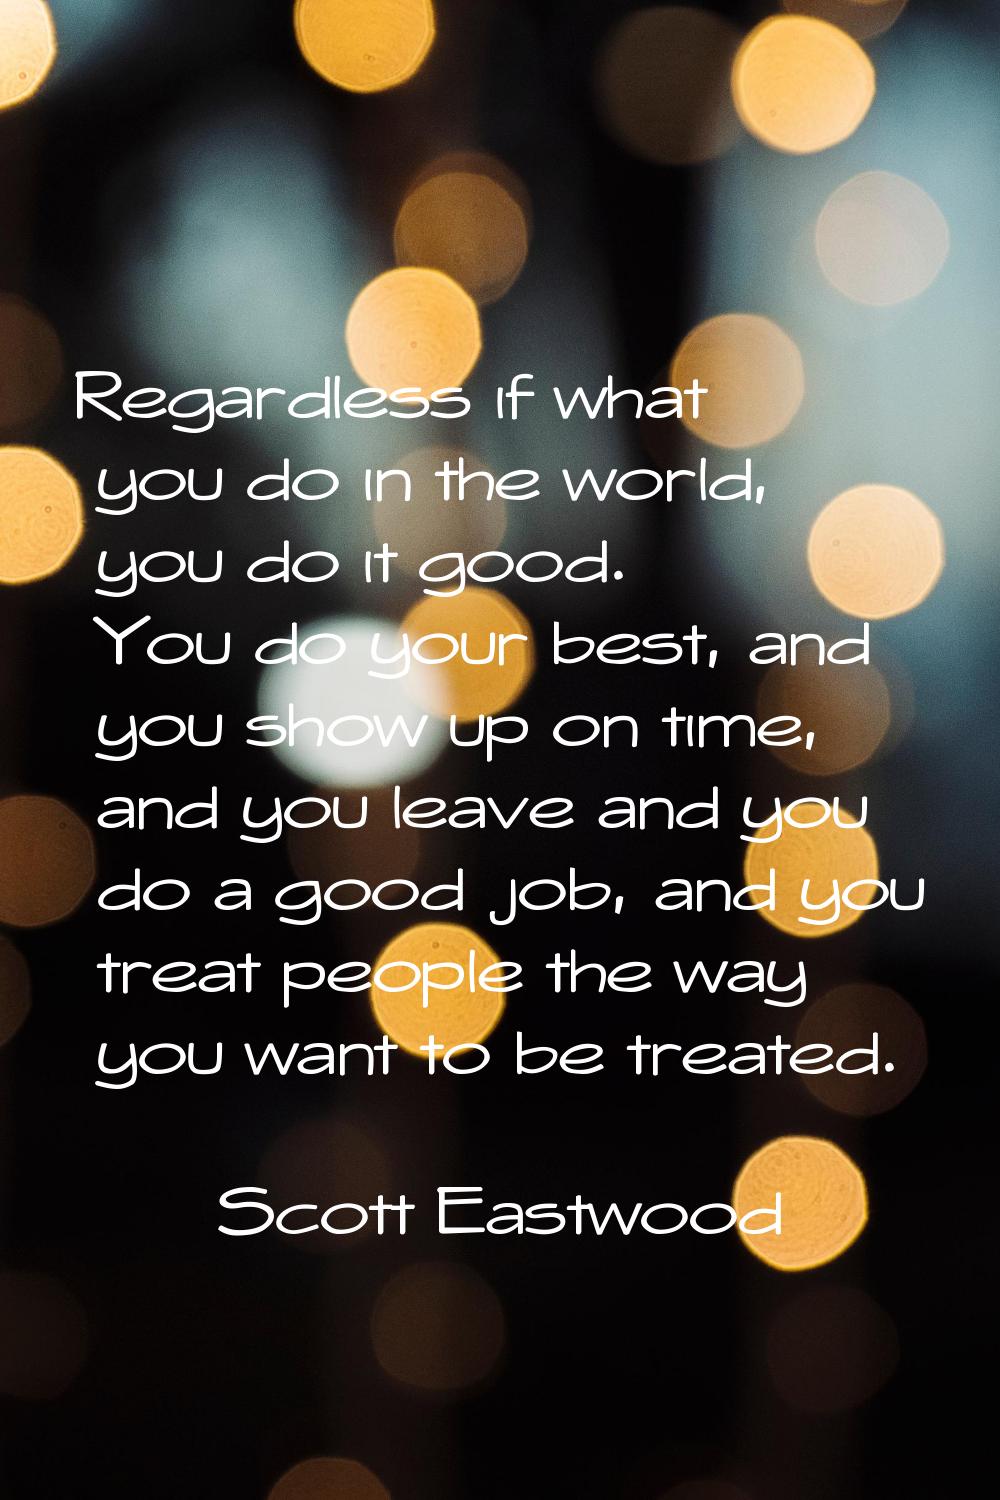 Regardless if what you do in the world, you do it good. You do your best, and you show up on time, 